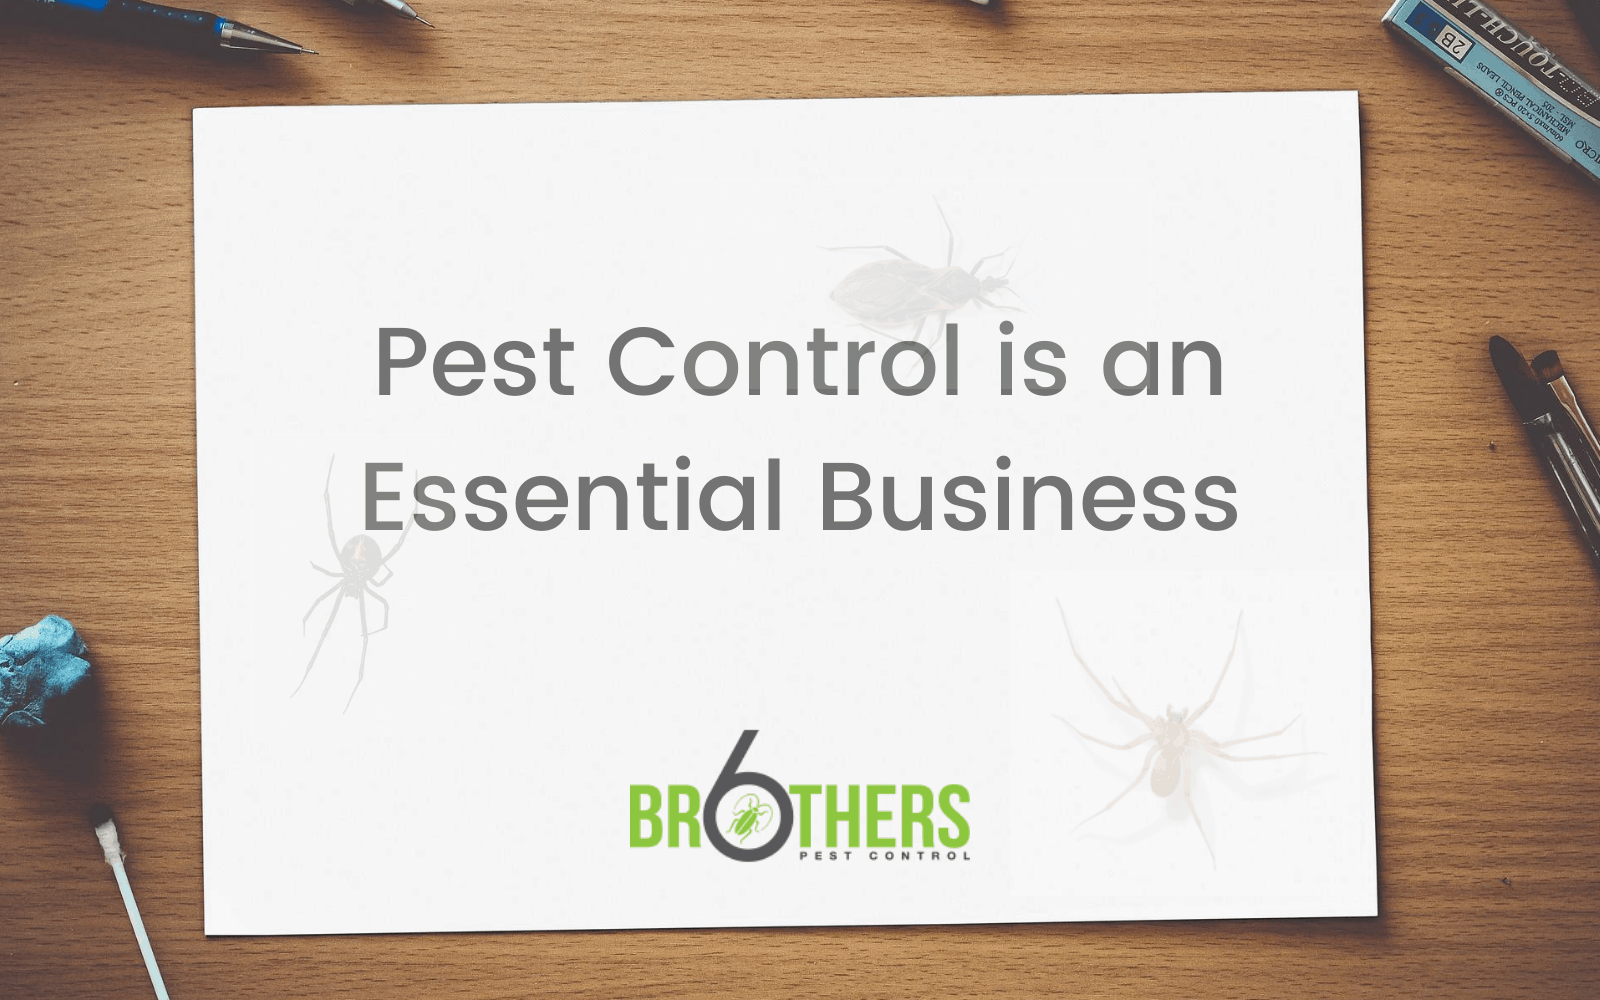 Pest Control is an Essential Business